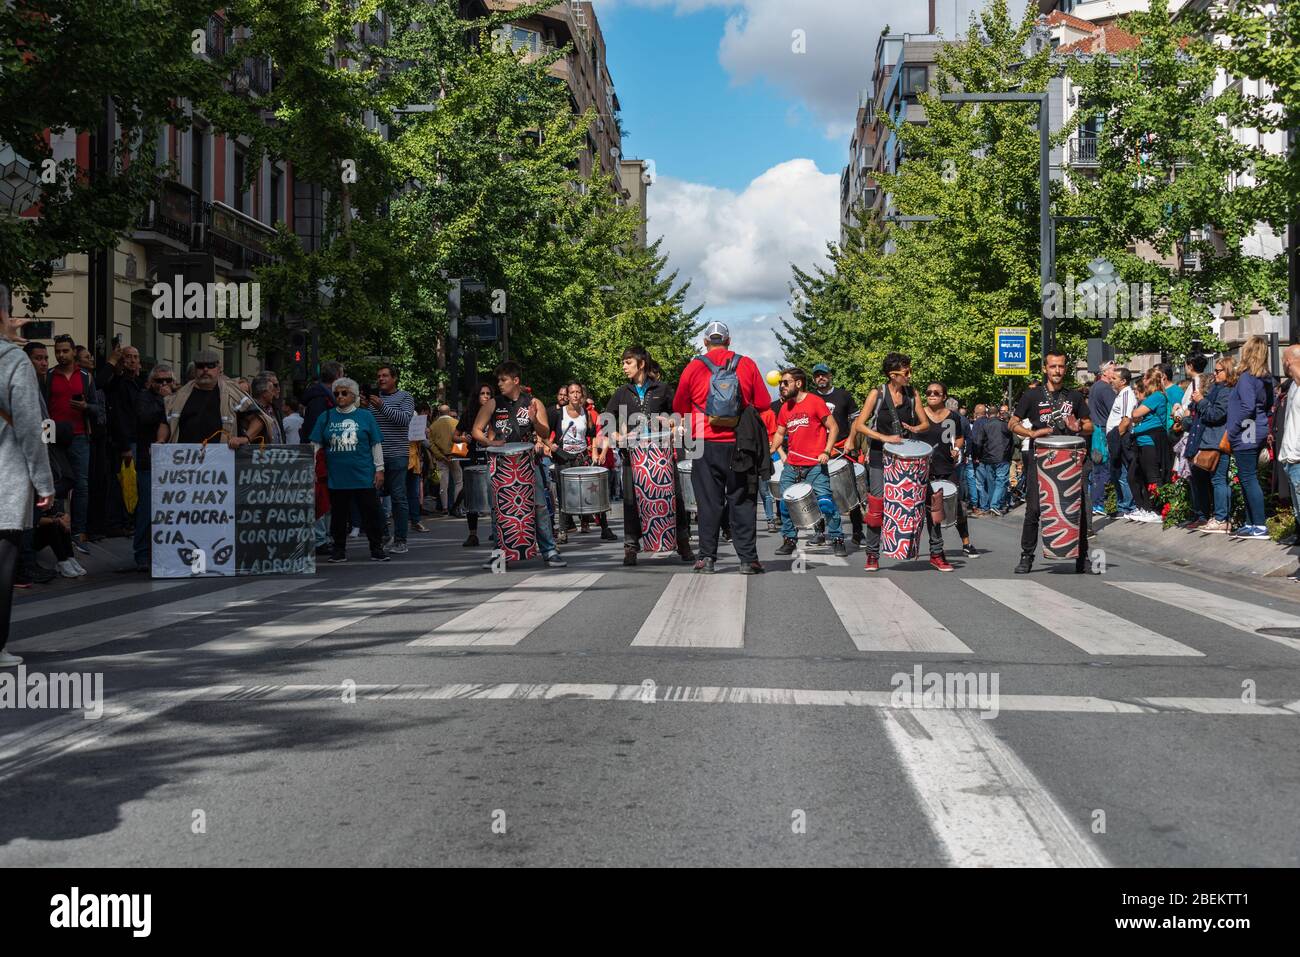 October 20, 2019 - Granada, Spain. A protest against the corrupted Spanish healthcare system on the main street in Granada. Stock Photo